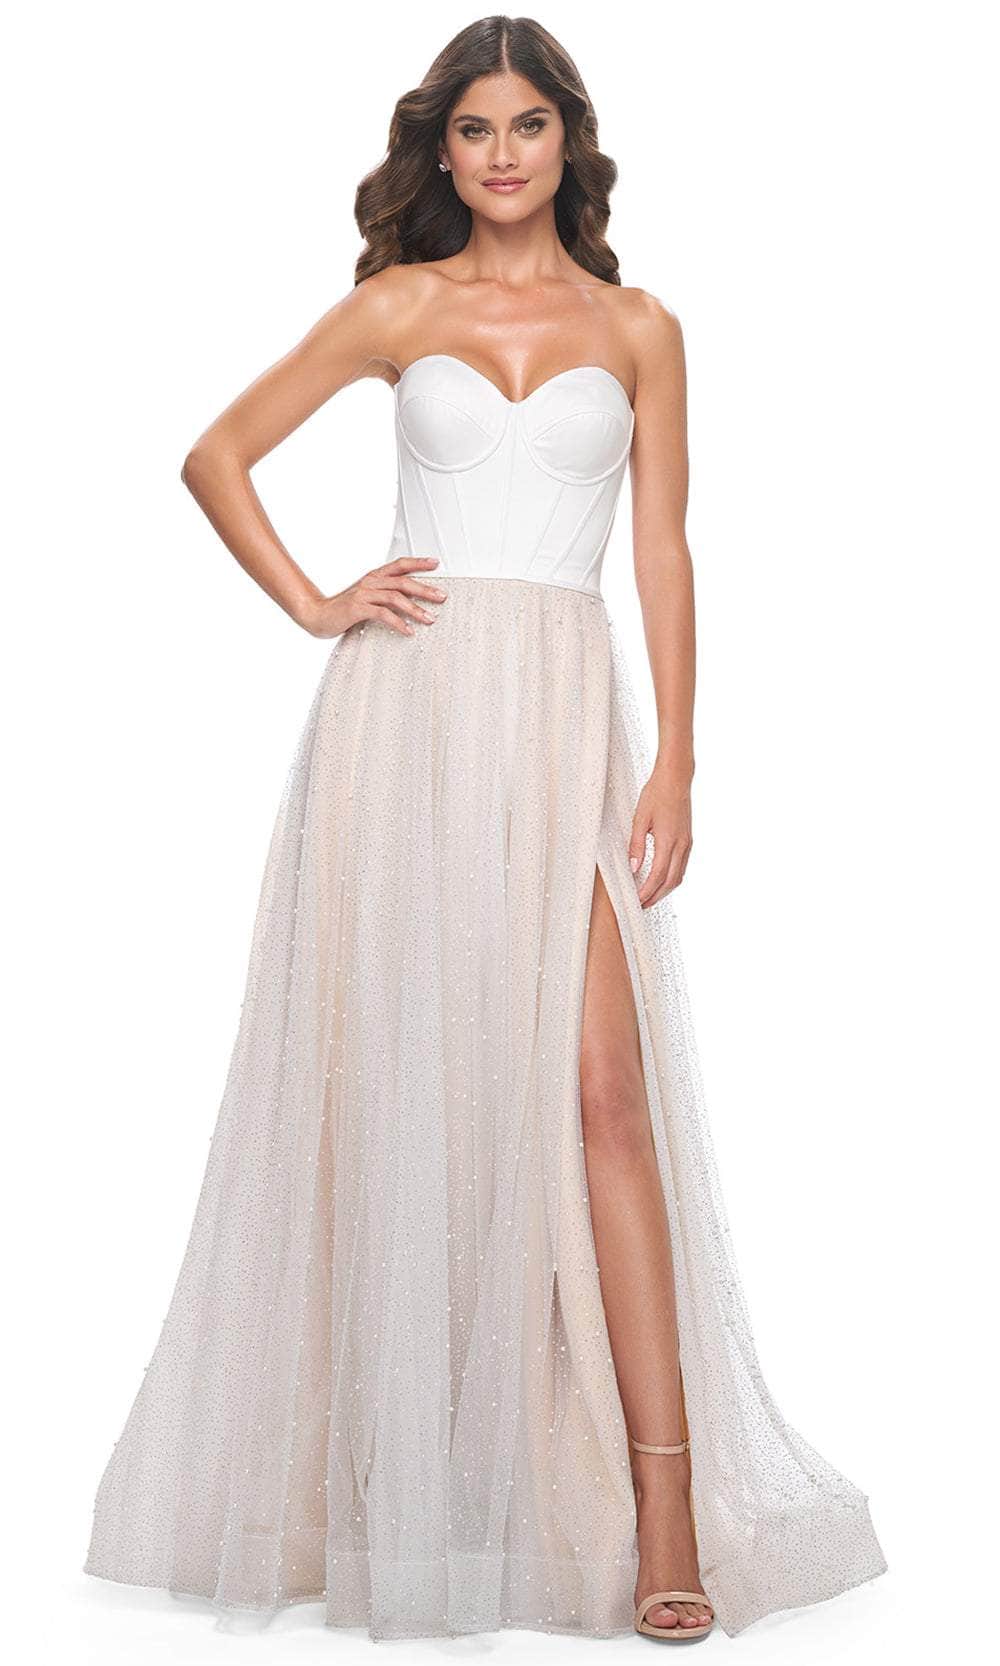 Image of La Femme 32149 - Sweetheart Strapless Prom Gown